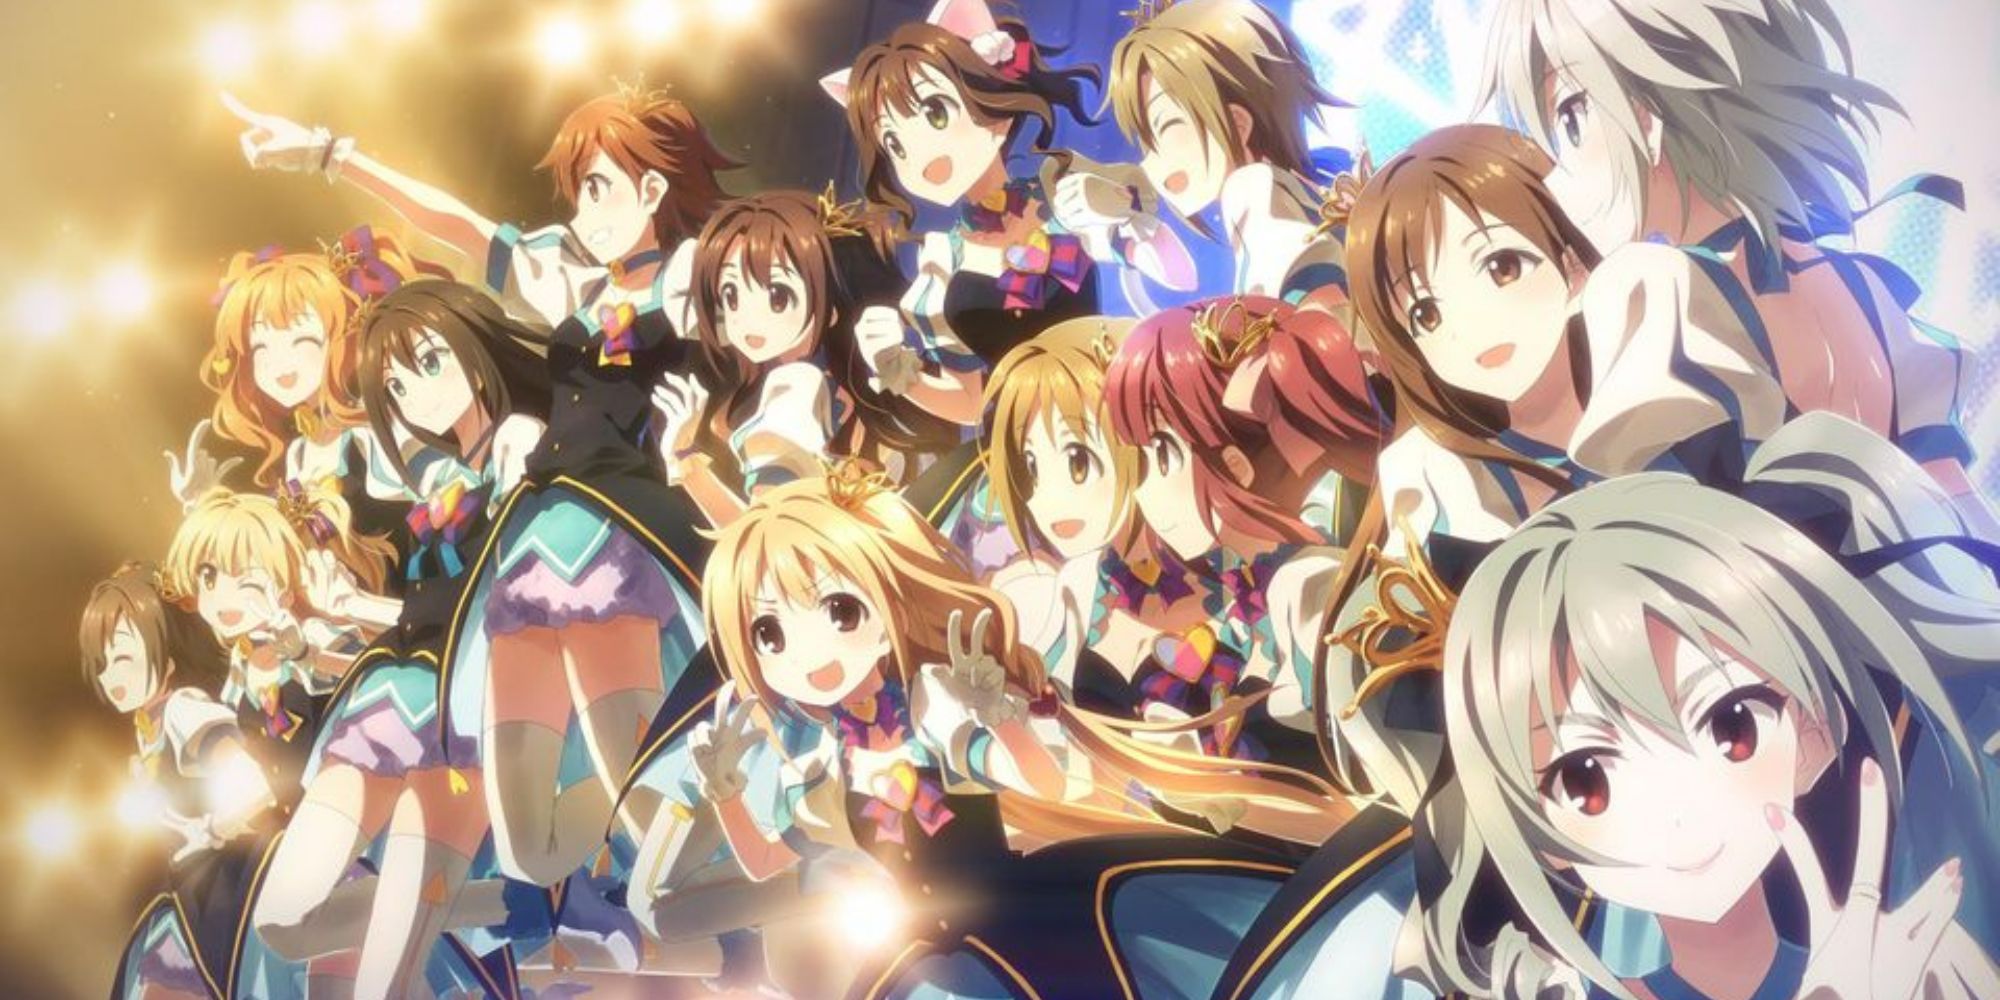 Many characters from The Idolmaster happily posing